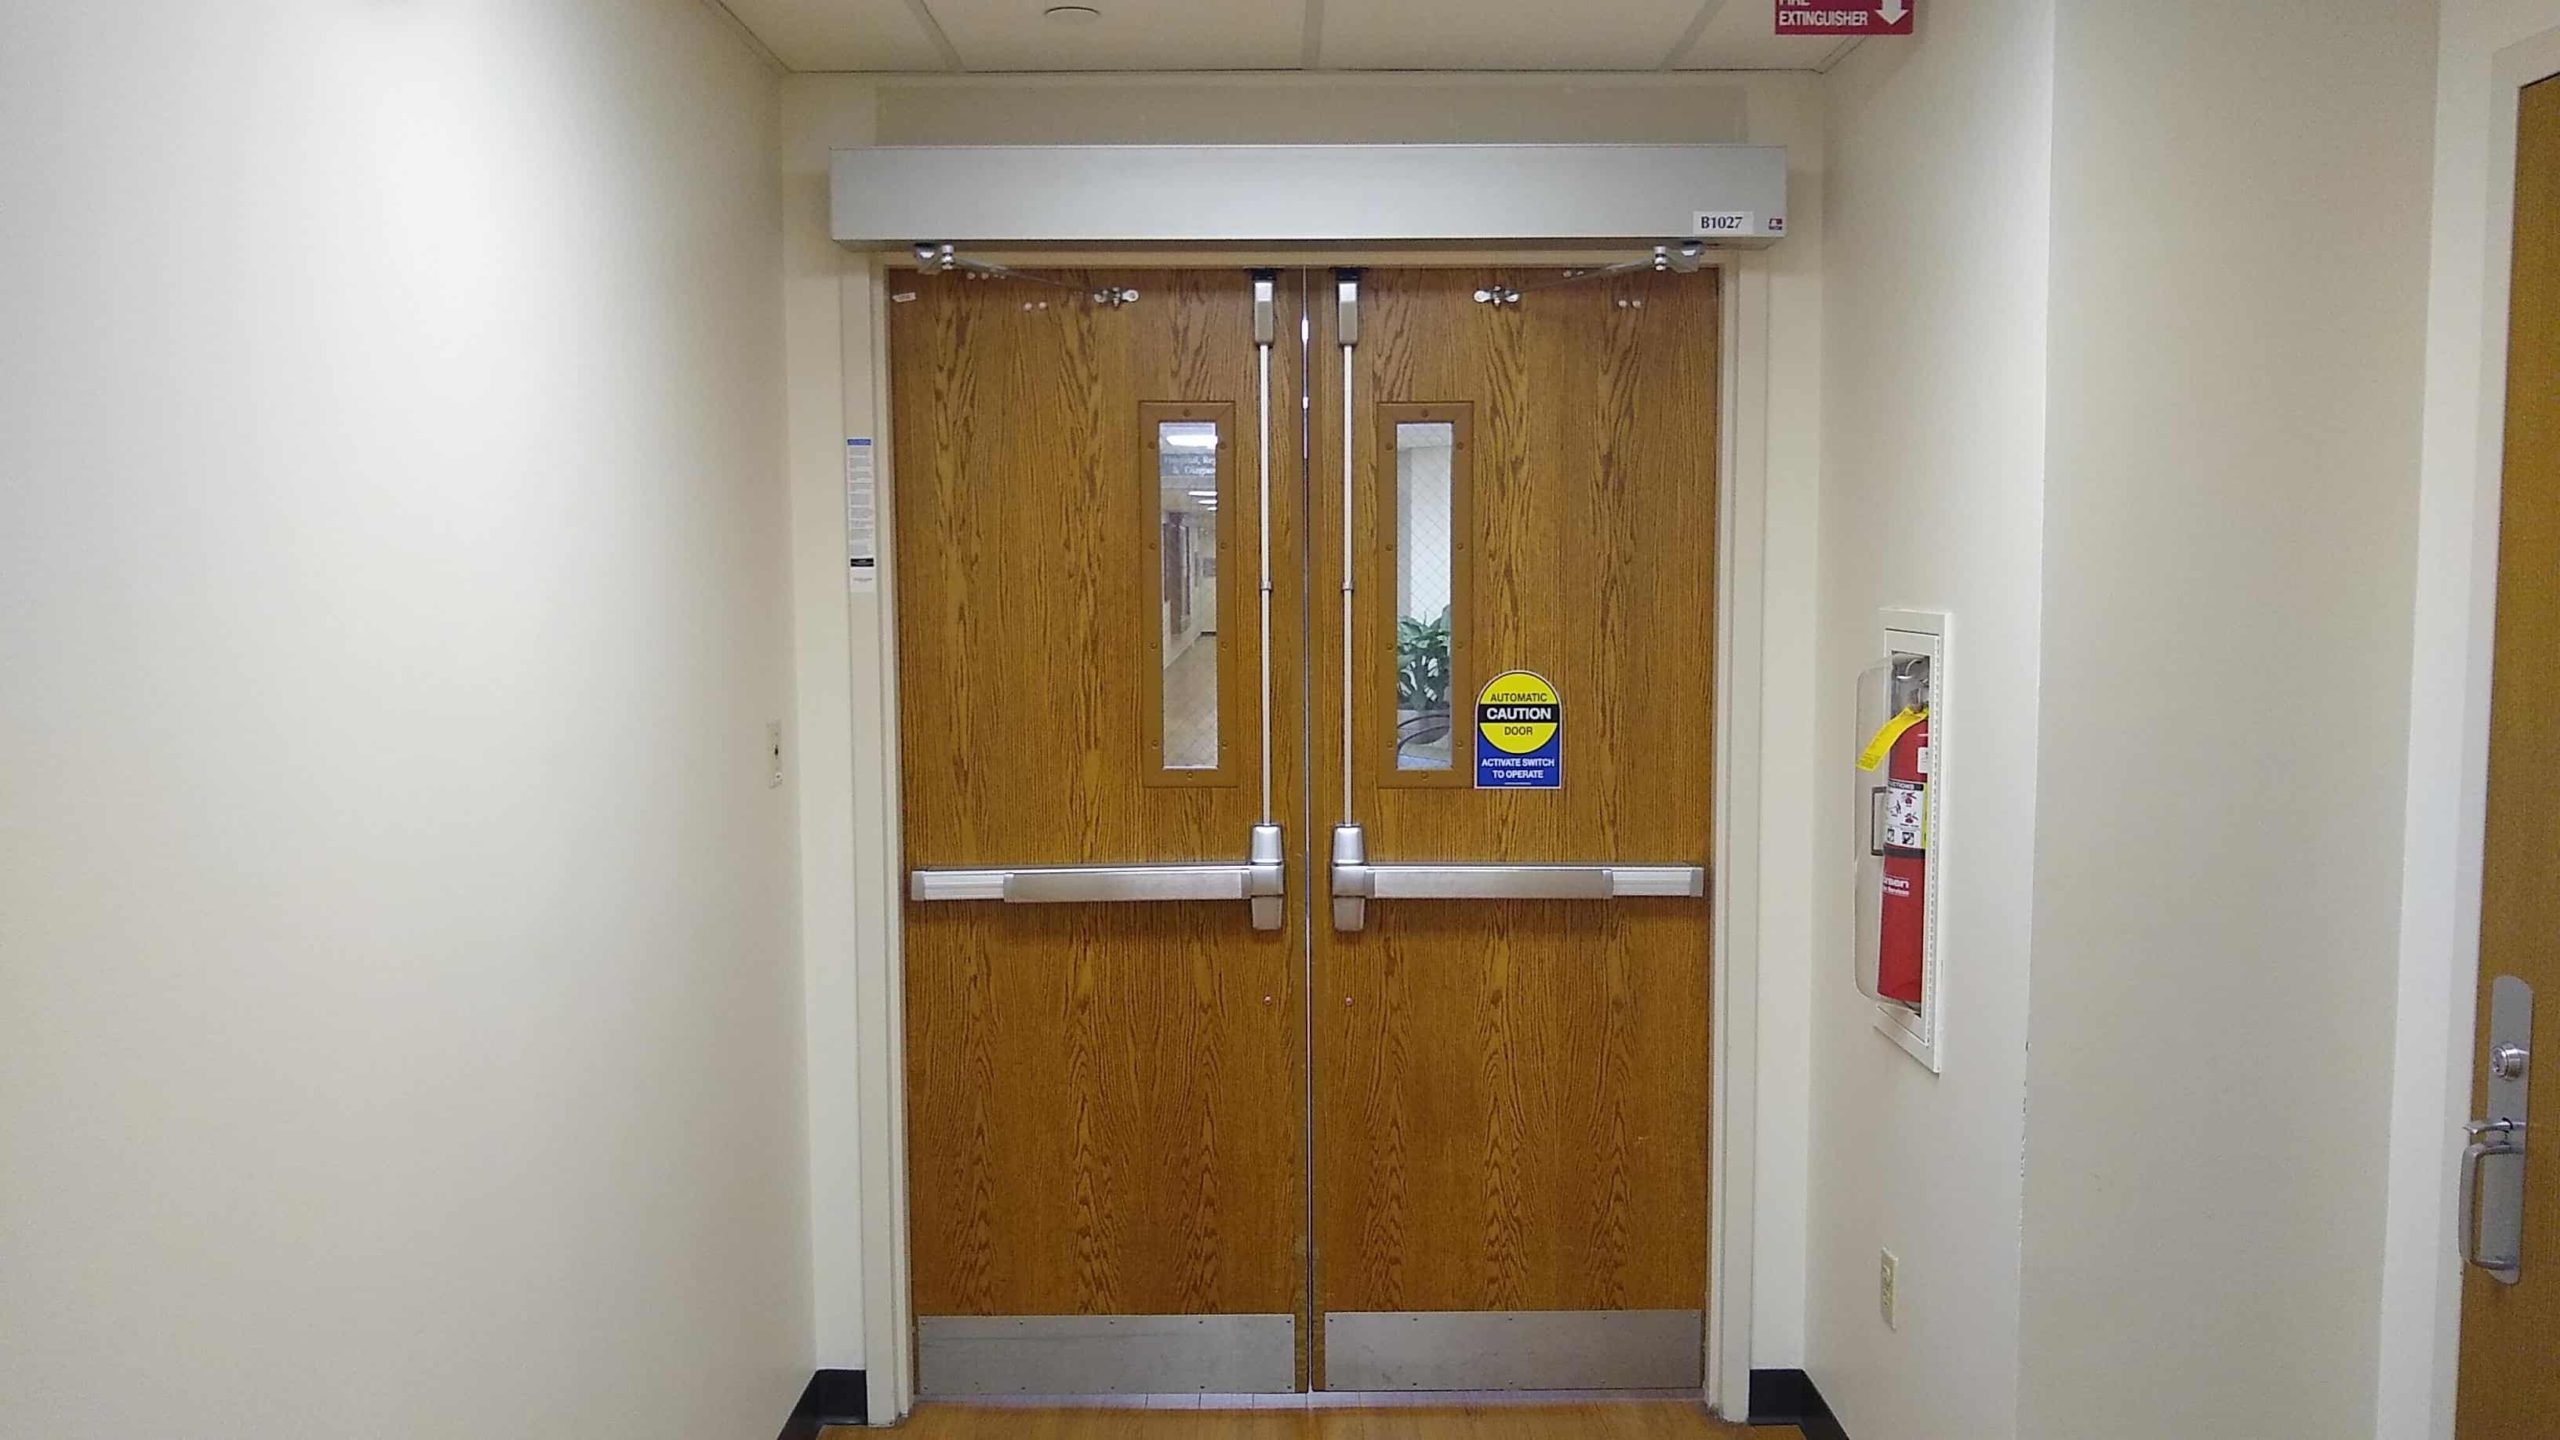 2 automatic opening doors